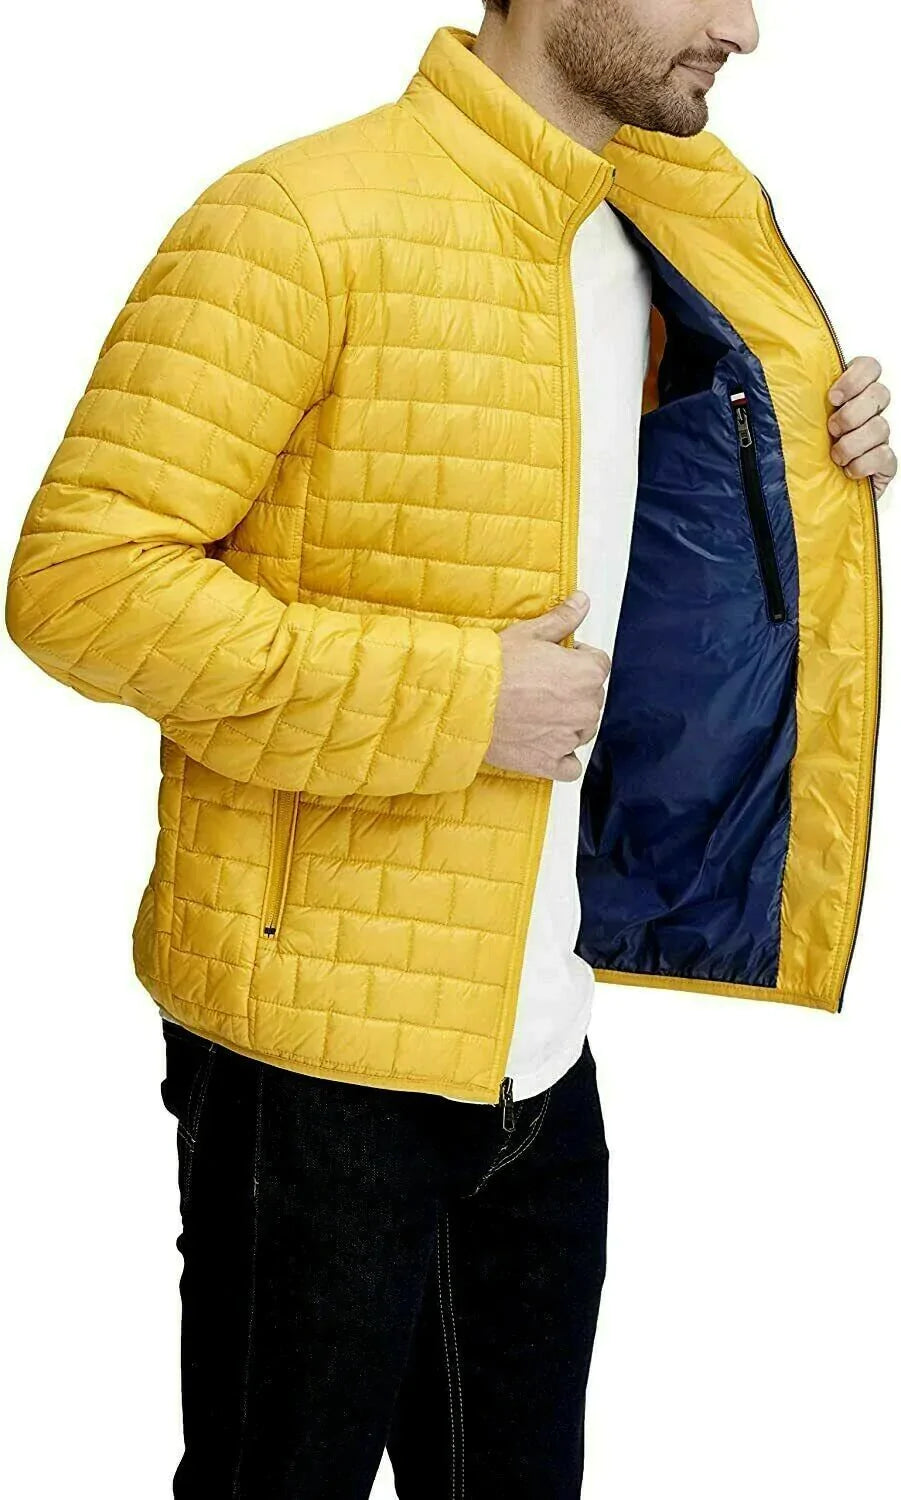 Tommy Hilfiger Box Quilted Packable Puffer Jacket Yellow Size XL - SVNYFancy